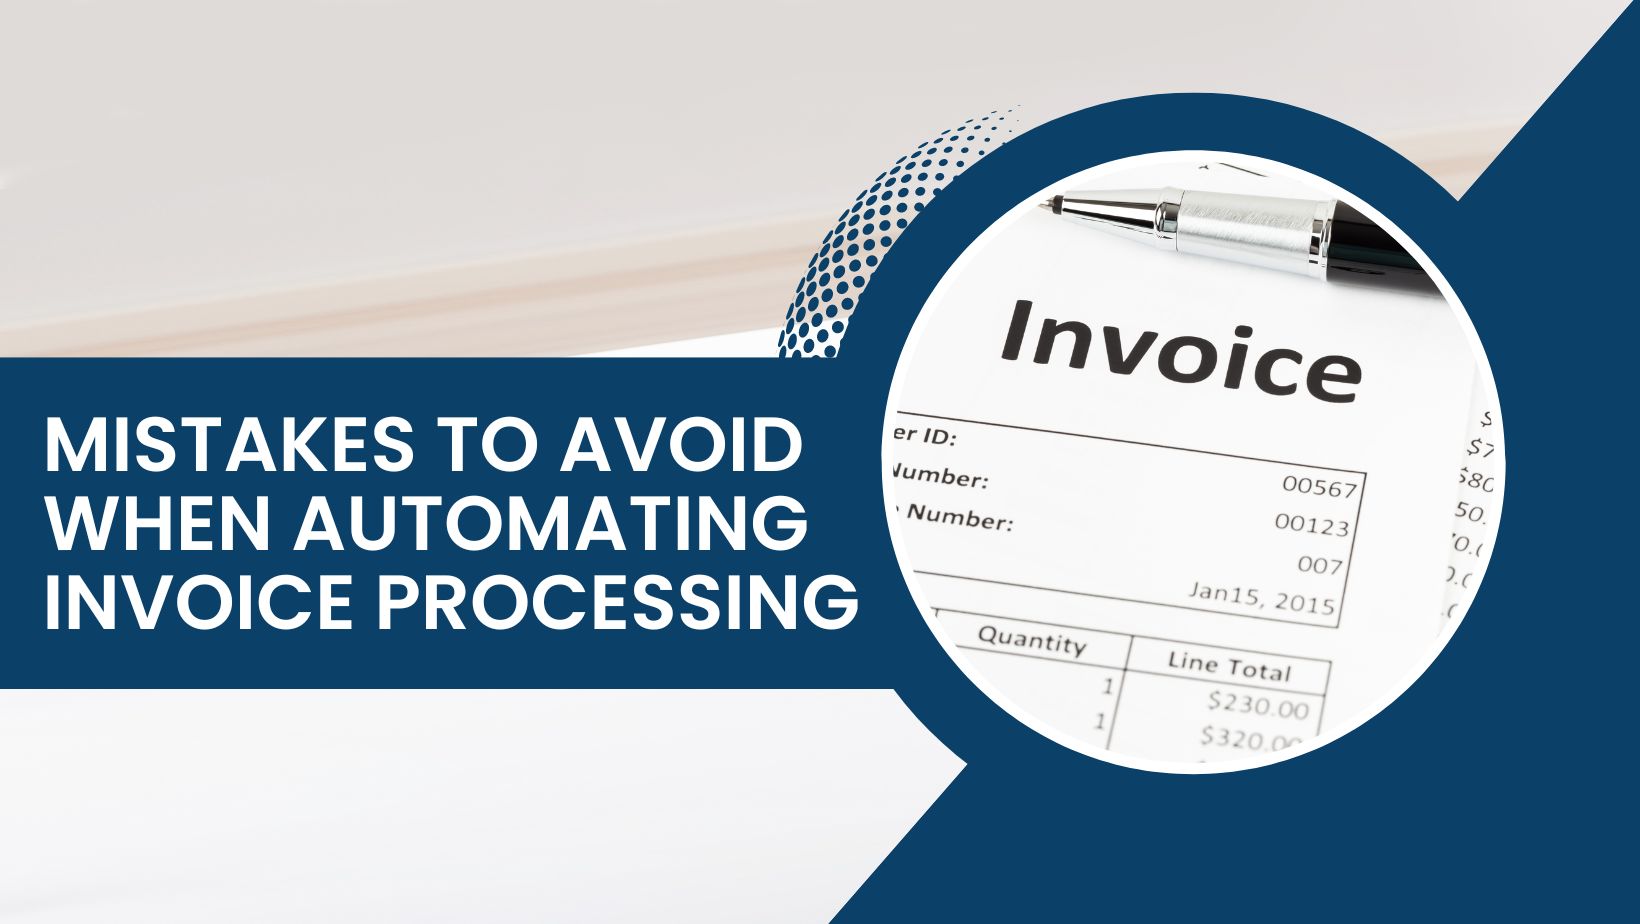 Common Mistakes to Avoid When Automating Invoice Processing